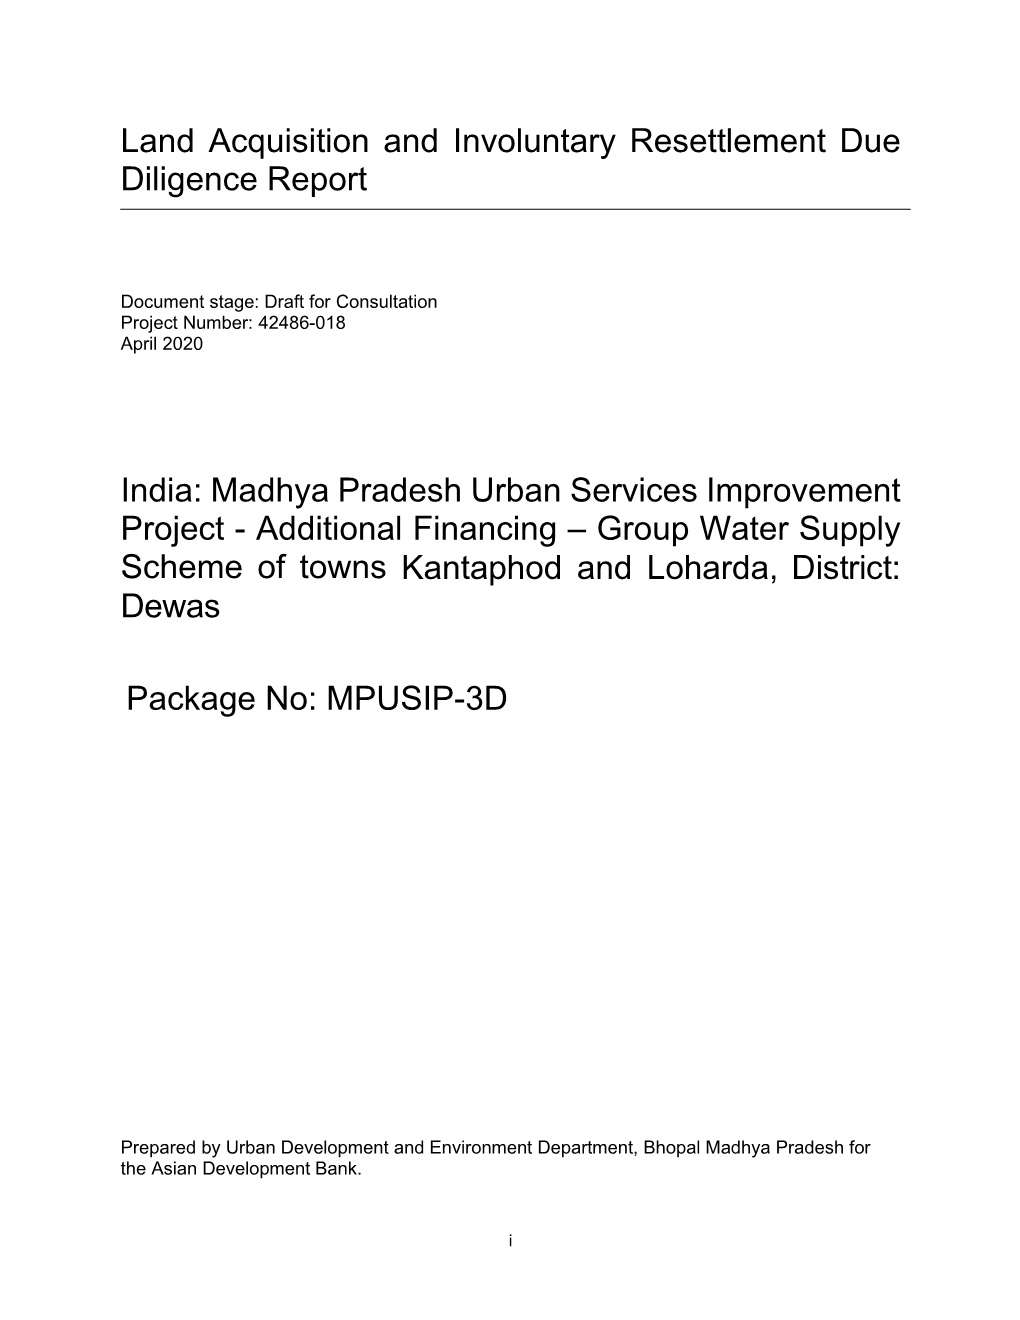 Land Acquisition and Involuntary Resettlement Due Diligence Report India: Madhya Pradesh Urban Services Improvement Project